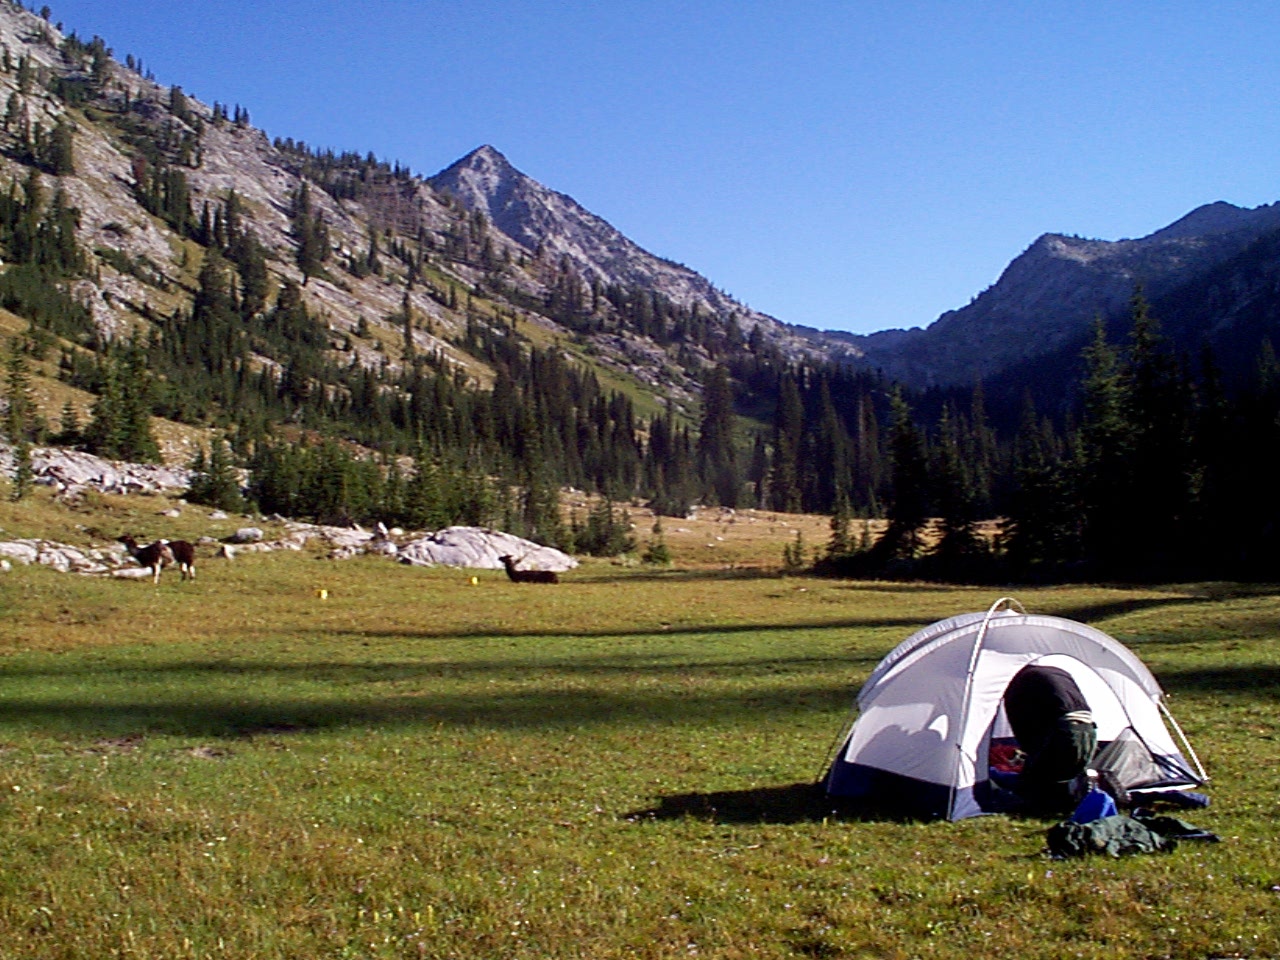 Small camp tent located in a mountain meadows with peaks in background